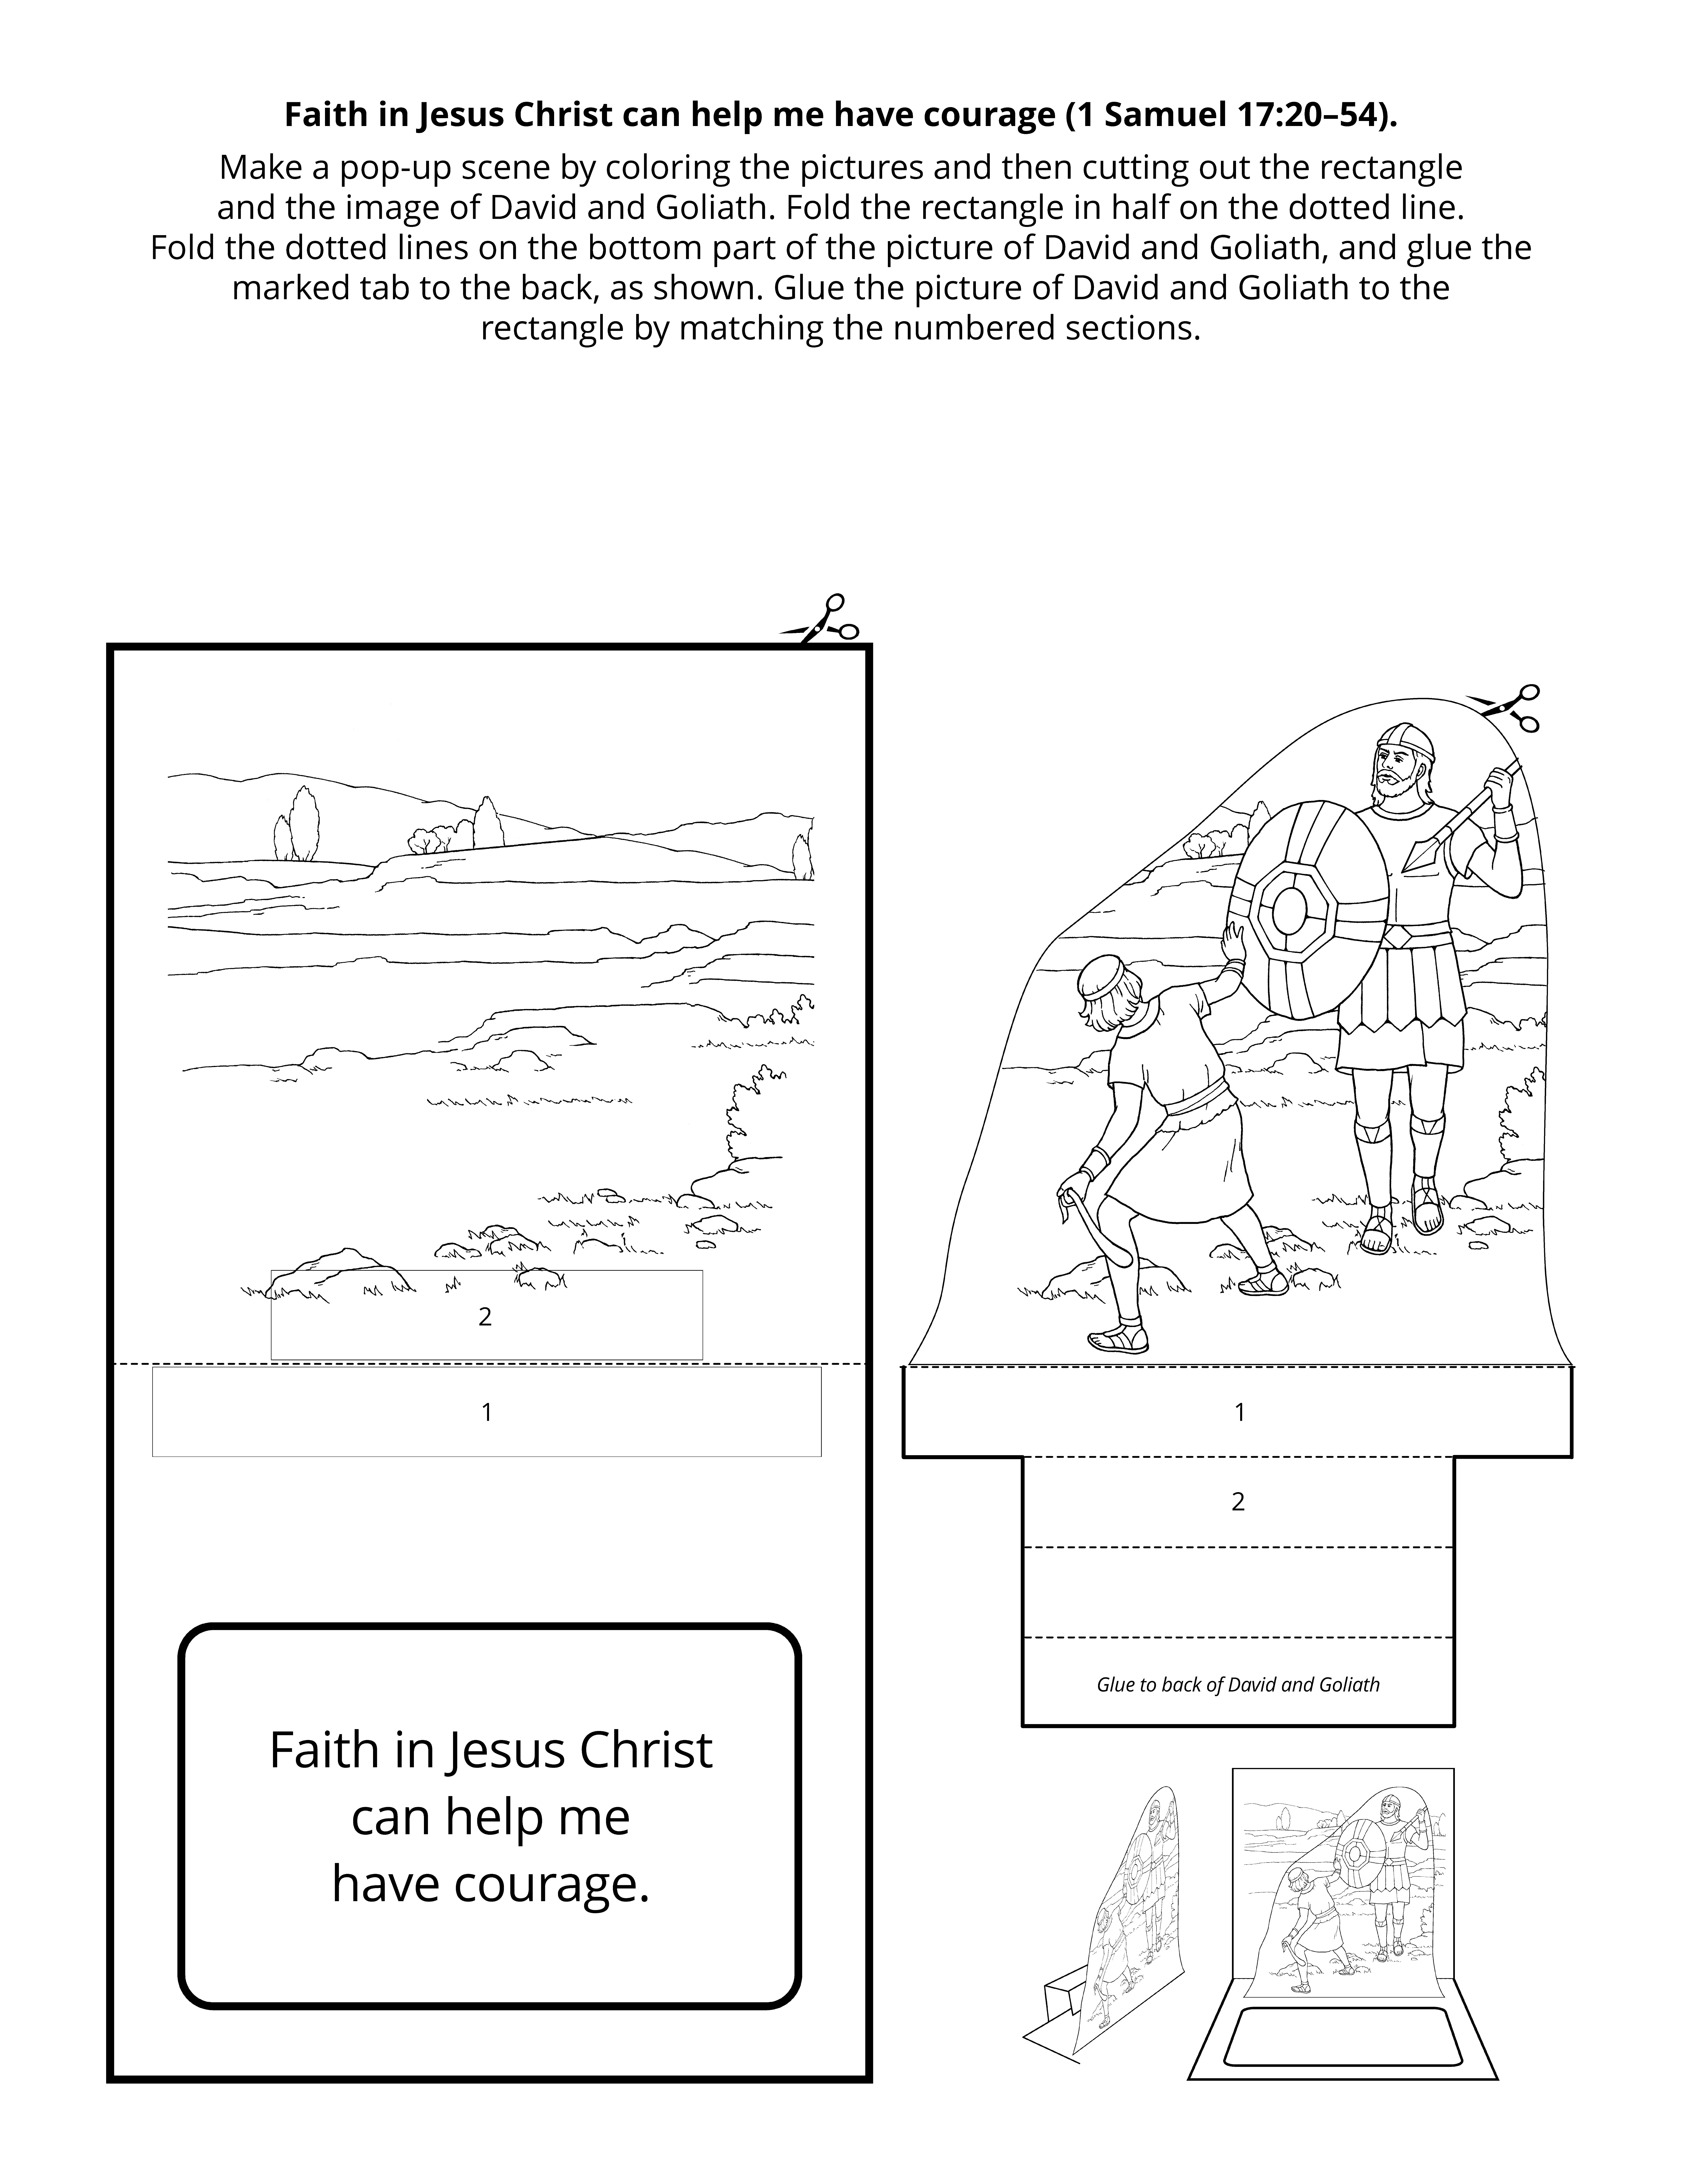 "Faith in Jesus Christ can help me have courage" activity page.